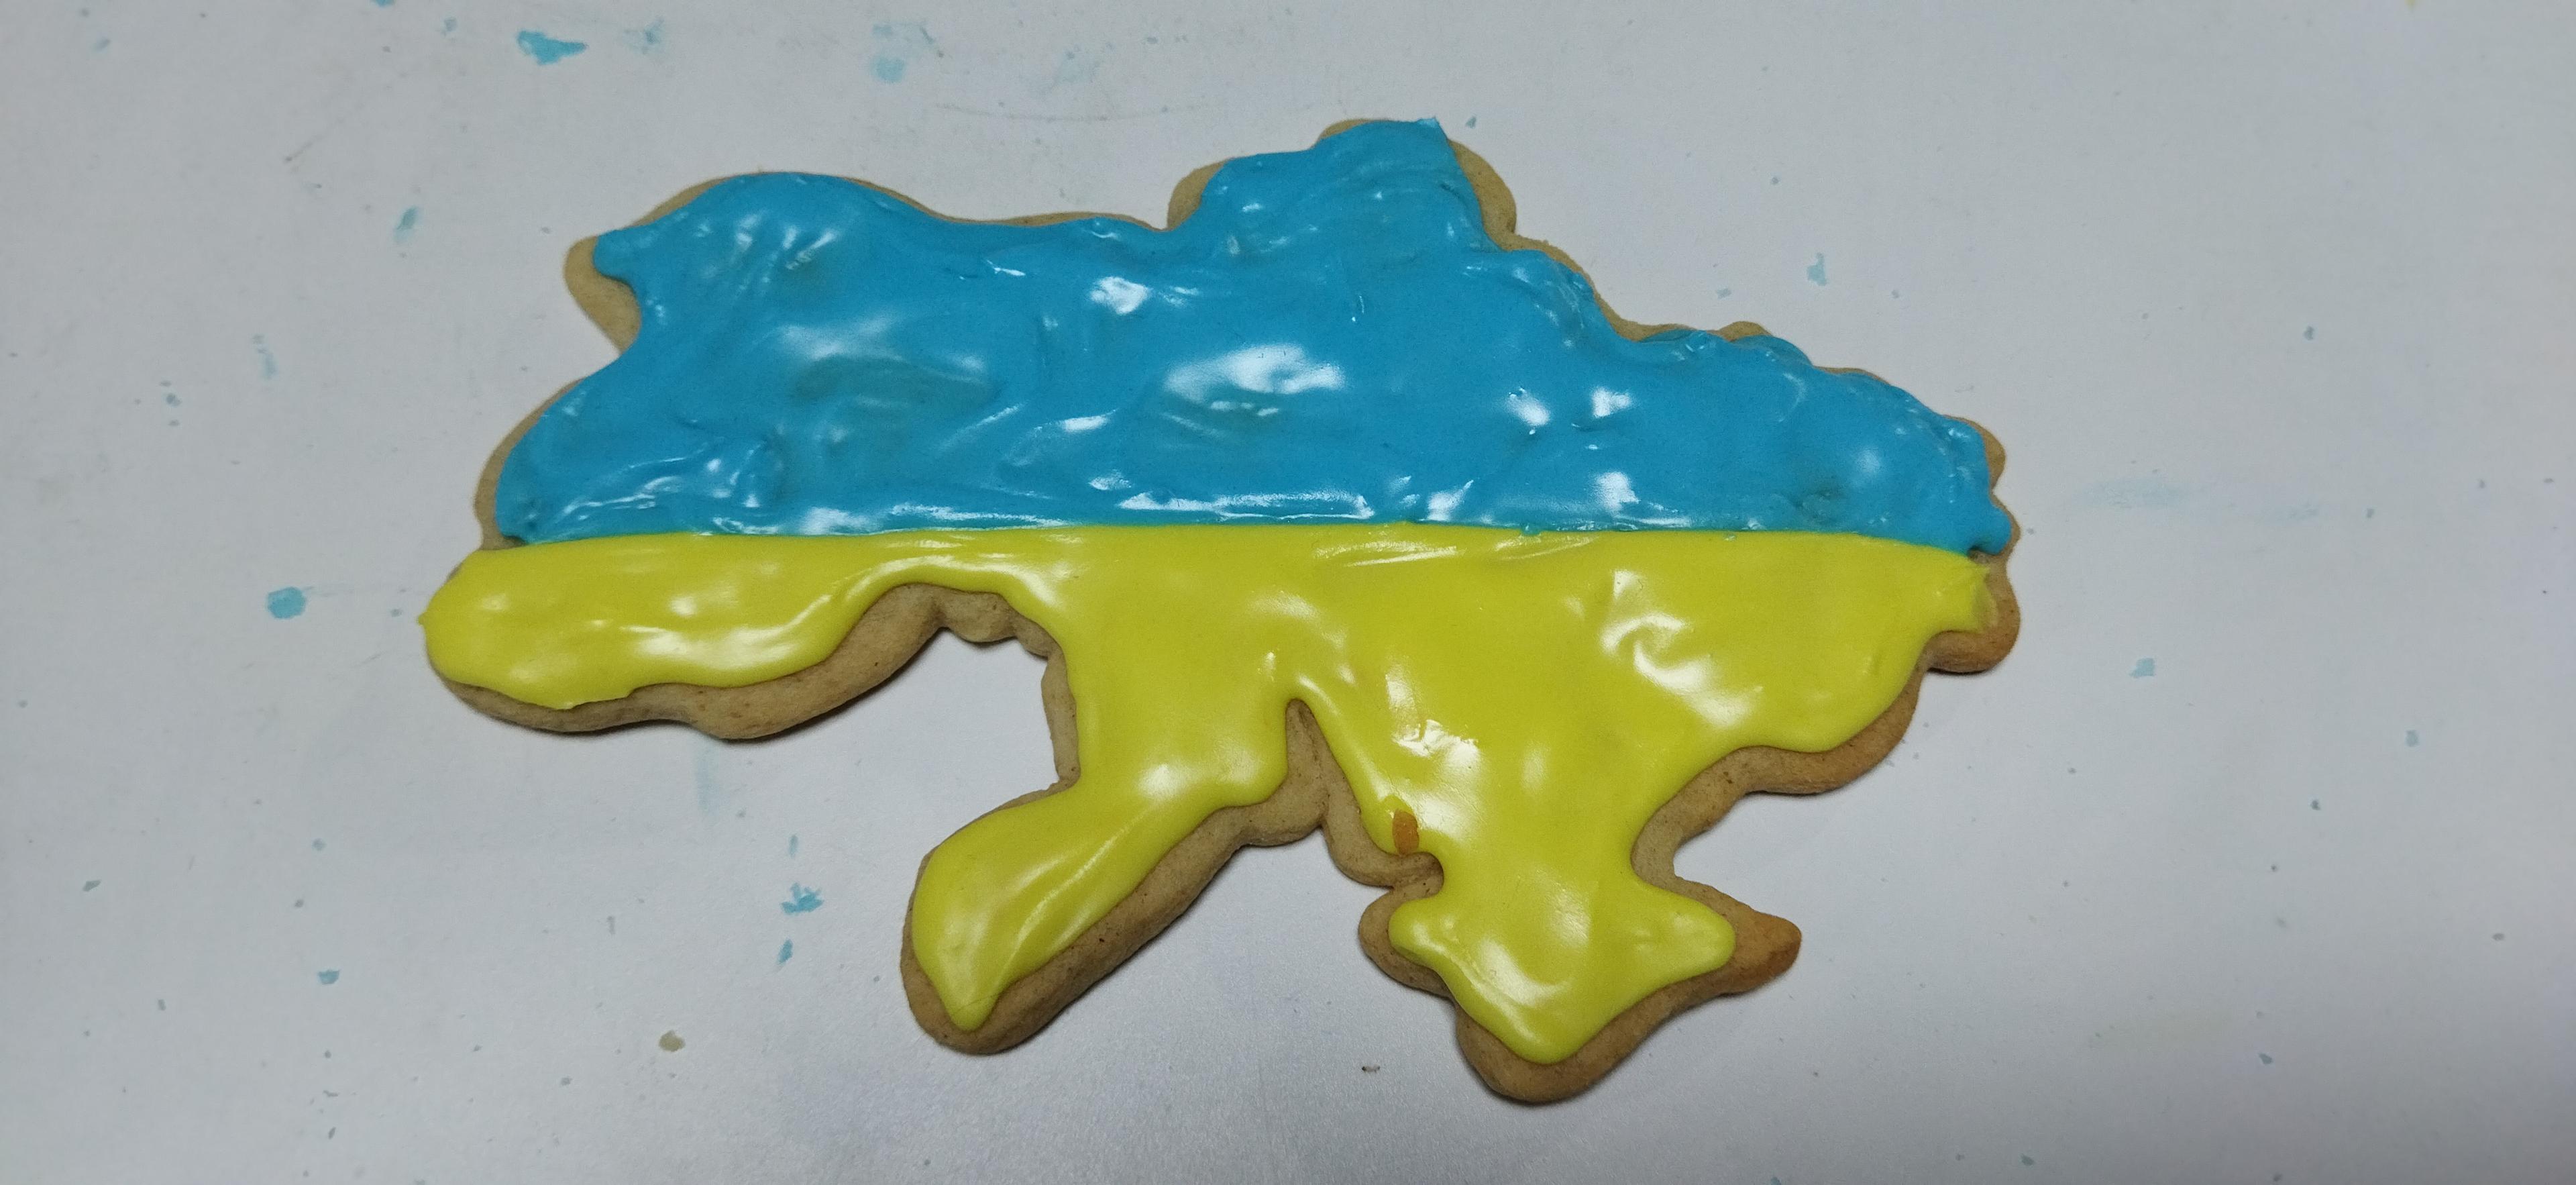 Ukraine Cookie Cutter - The finalised iced cookie - 3d model